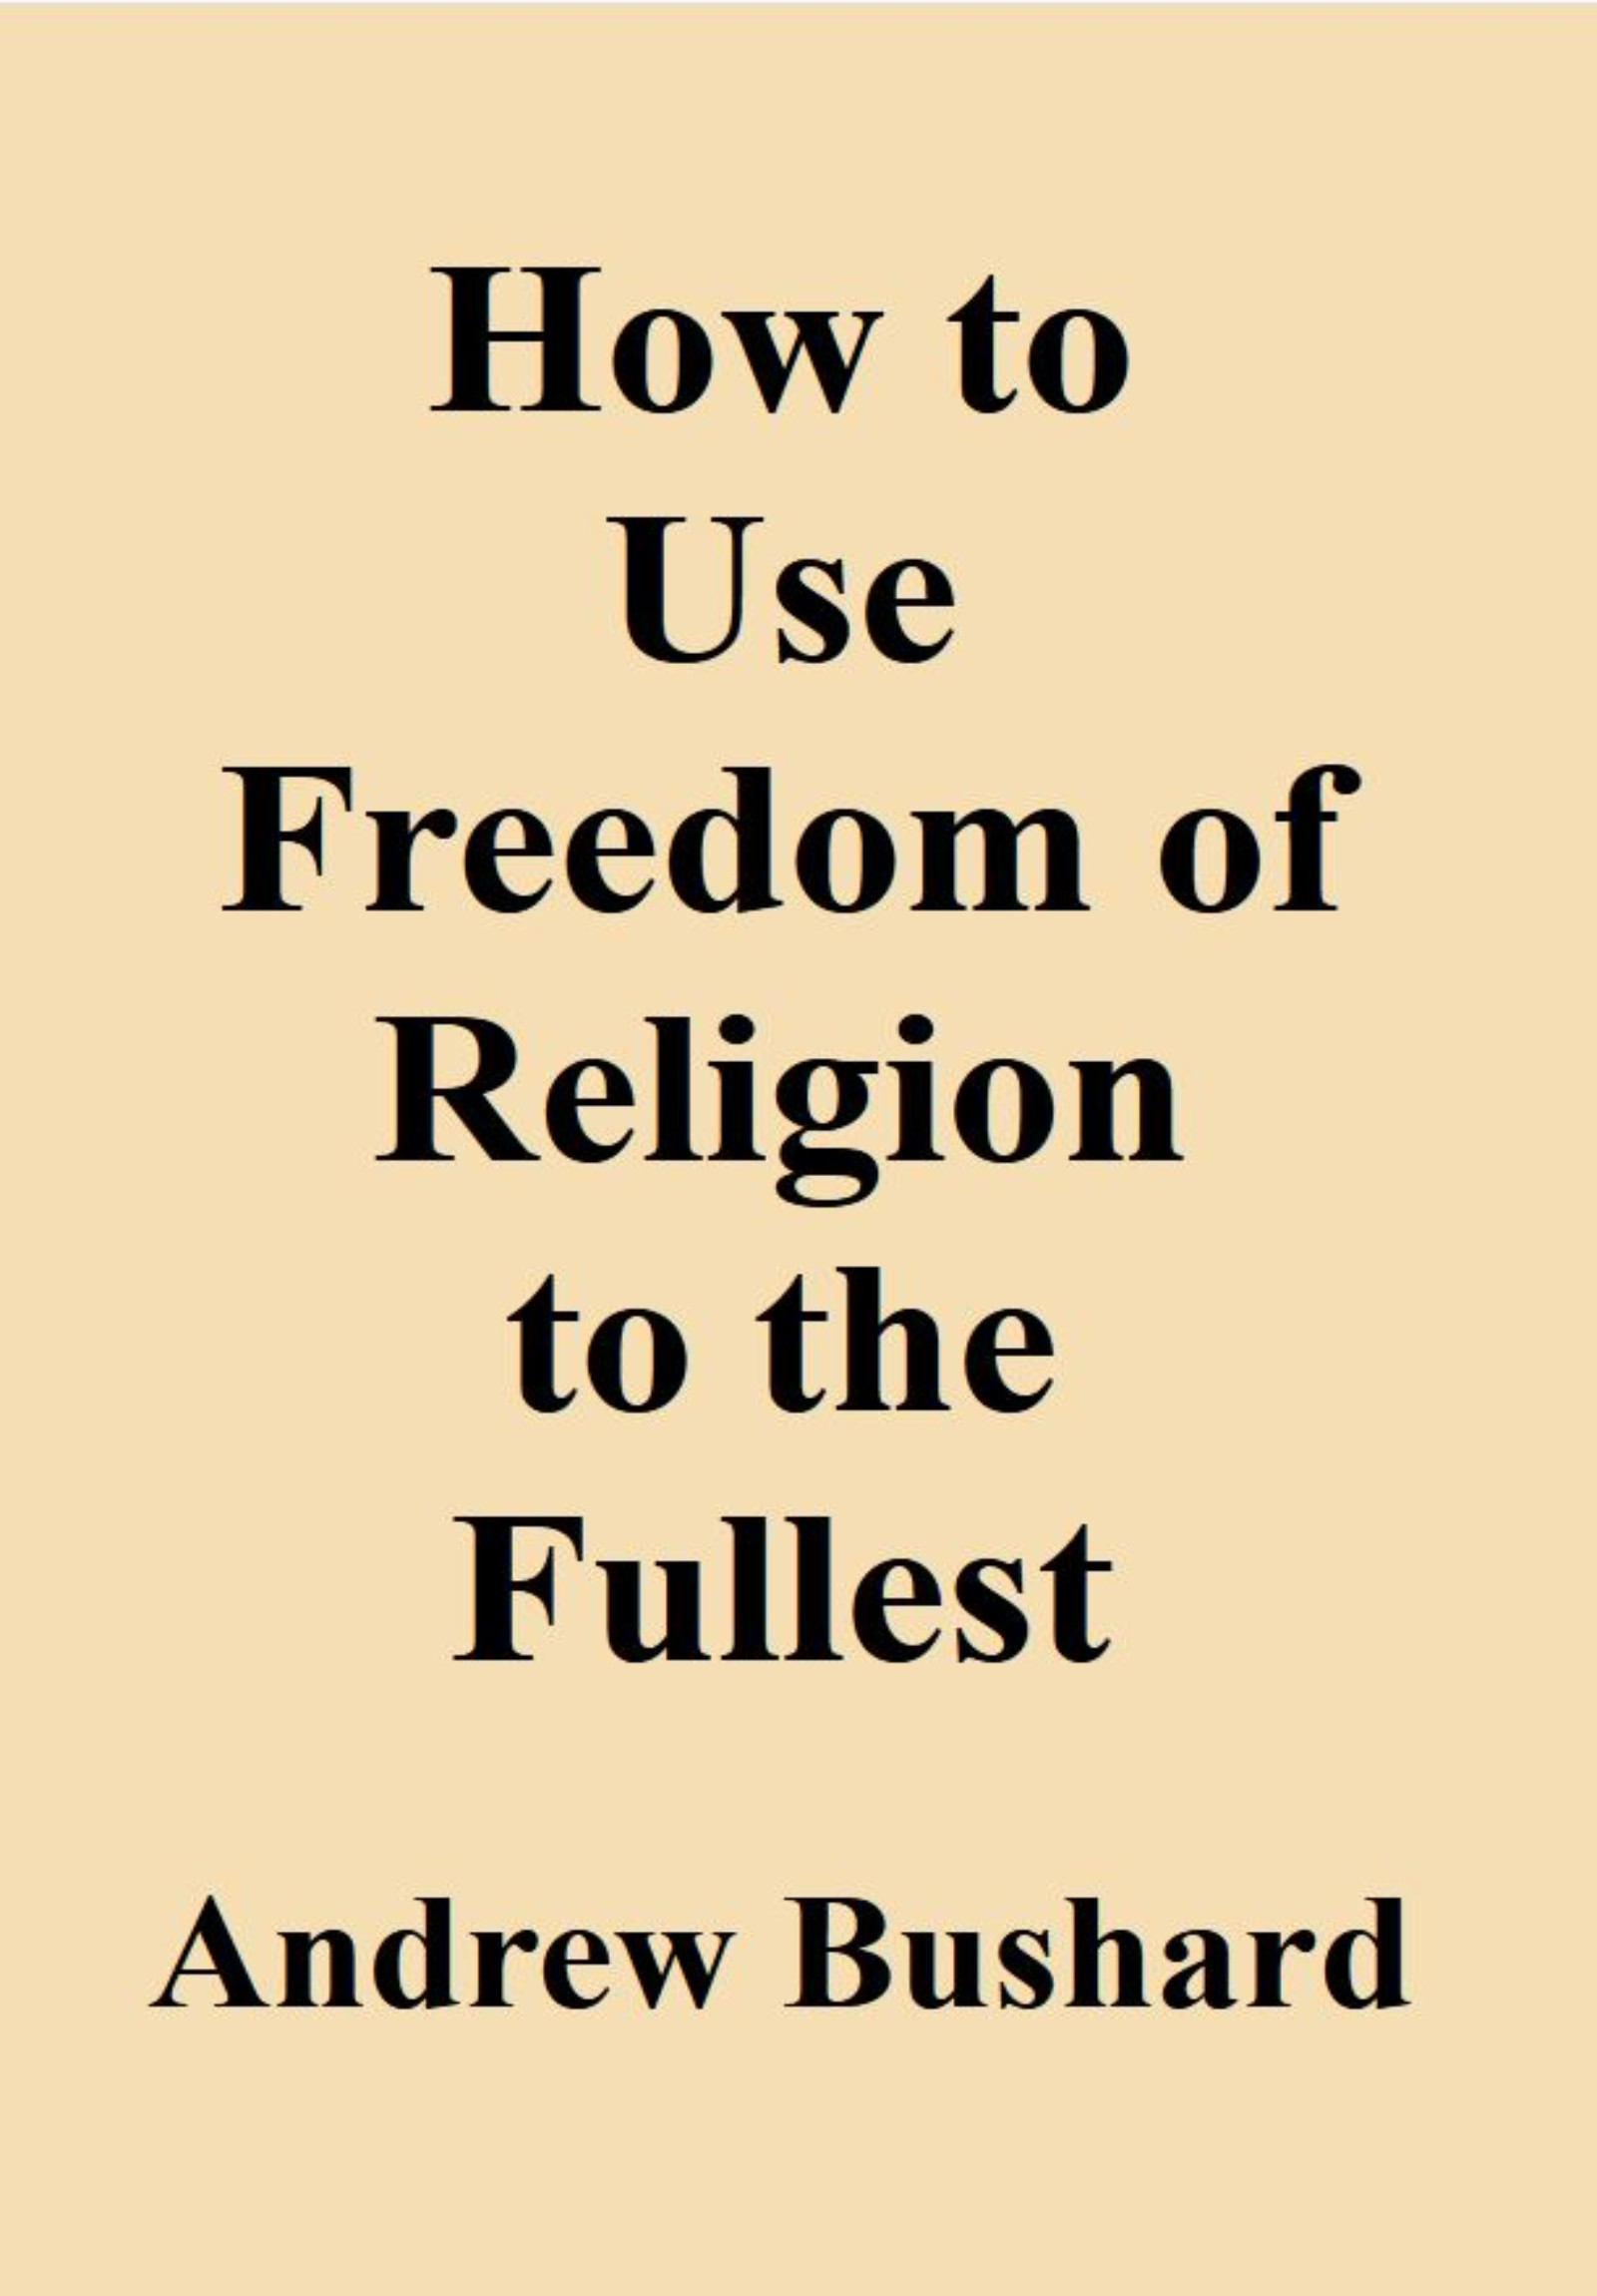 How to Use Freedom of Religion to the Fullest